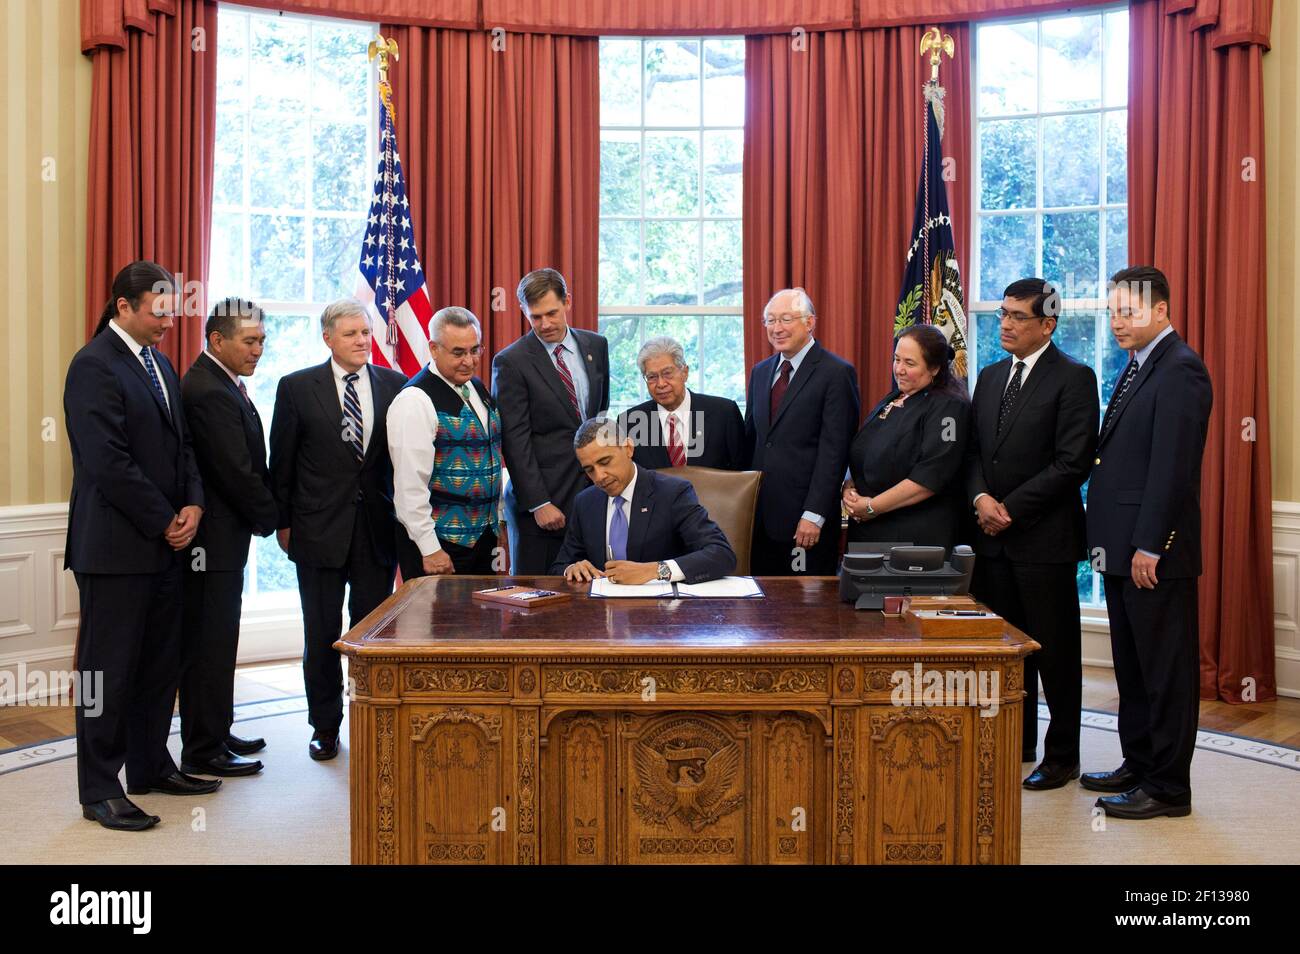 President Barack Obama signs H.R. 205 HEARTH Act of 2012 in the Oval Office July 30 2012. Standing behind the President from left are: Bryan Newland Senior Policy Advisor at the Department of the Interior; Governor Randall Vicente Pueblo of Acoma in New Mexico; David Hayes Deputy Secretary of the Department of the Interior; Jefferson Keel President of the National Congress of American Indians; Rep. Martin Heinrich D-N.M.;  Sen. Daniel Akaka D-Hawaii; interior Secretary Ken Salazar; Cheryl Causley Chairperson of the National American Indian Housing Council; Governor Gregory Mendoza Gila River I Stock Photo